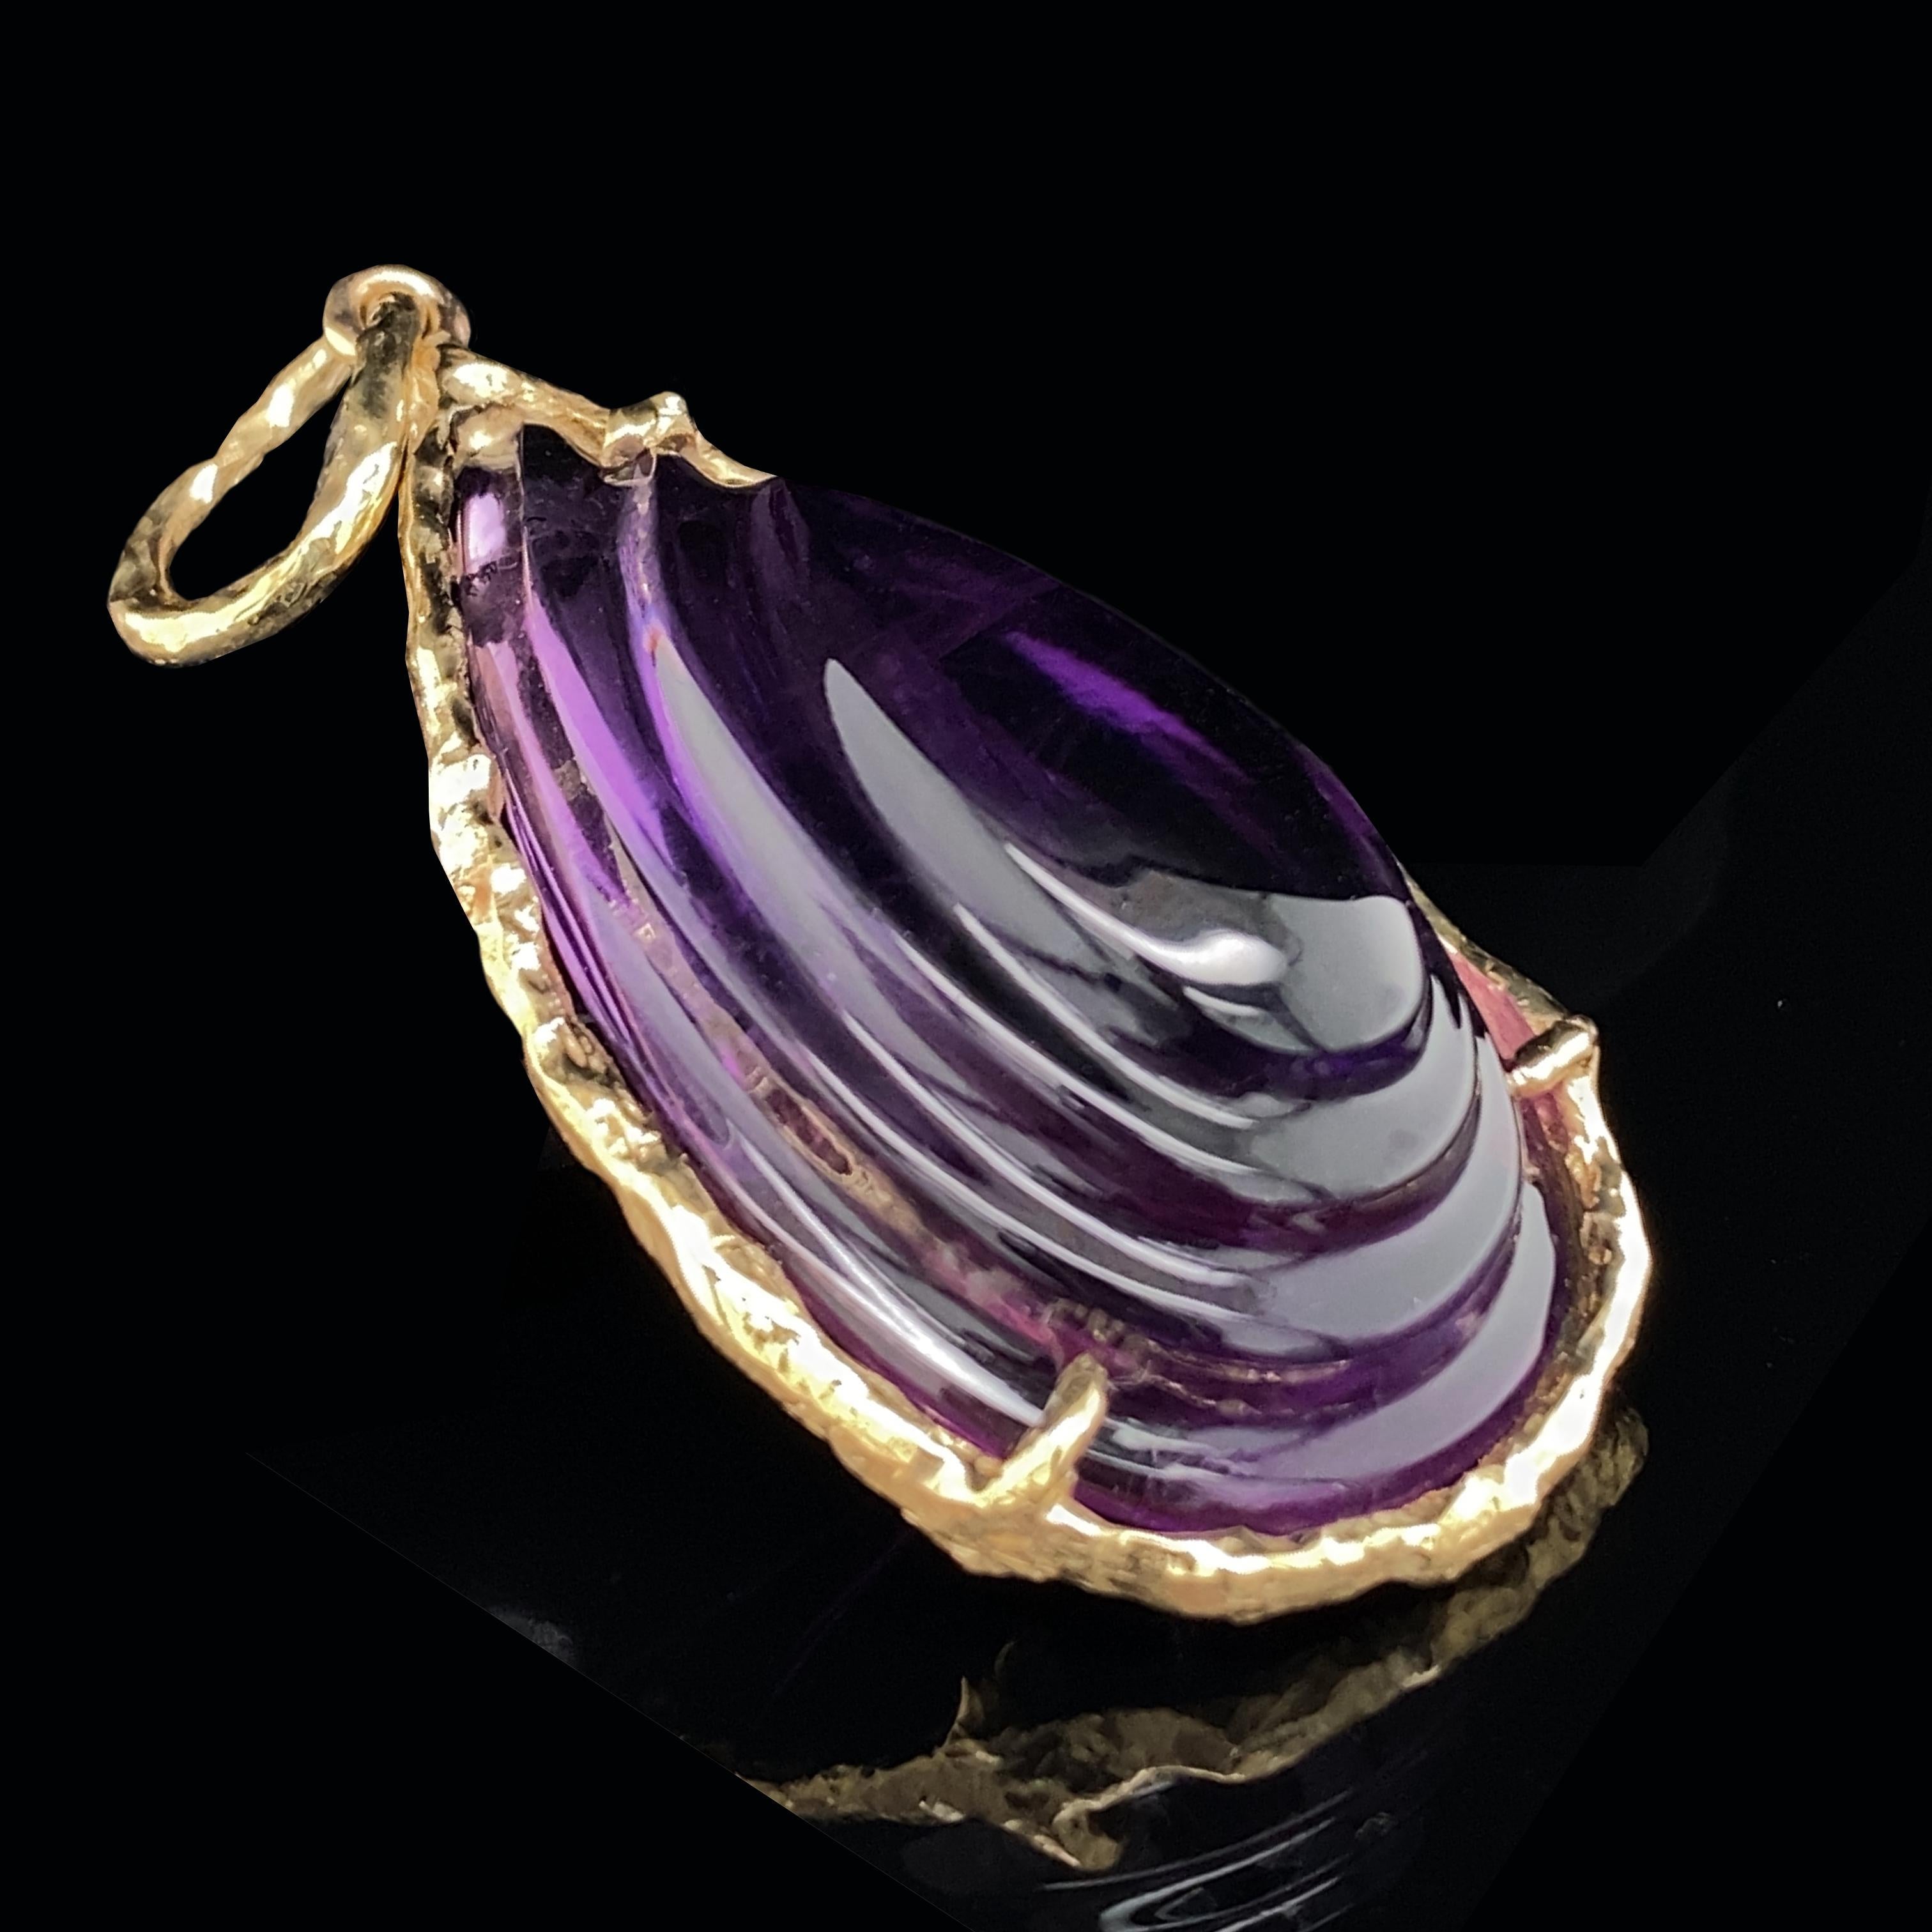 39 Carat Carved Amethyst Pendant in 18K Gold on Convertible Amethyst Bead Chain For Sale 5